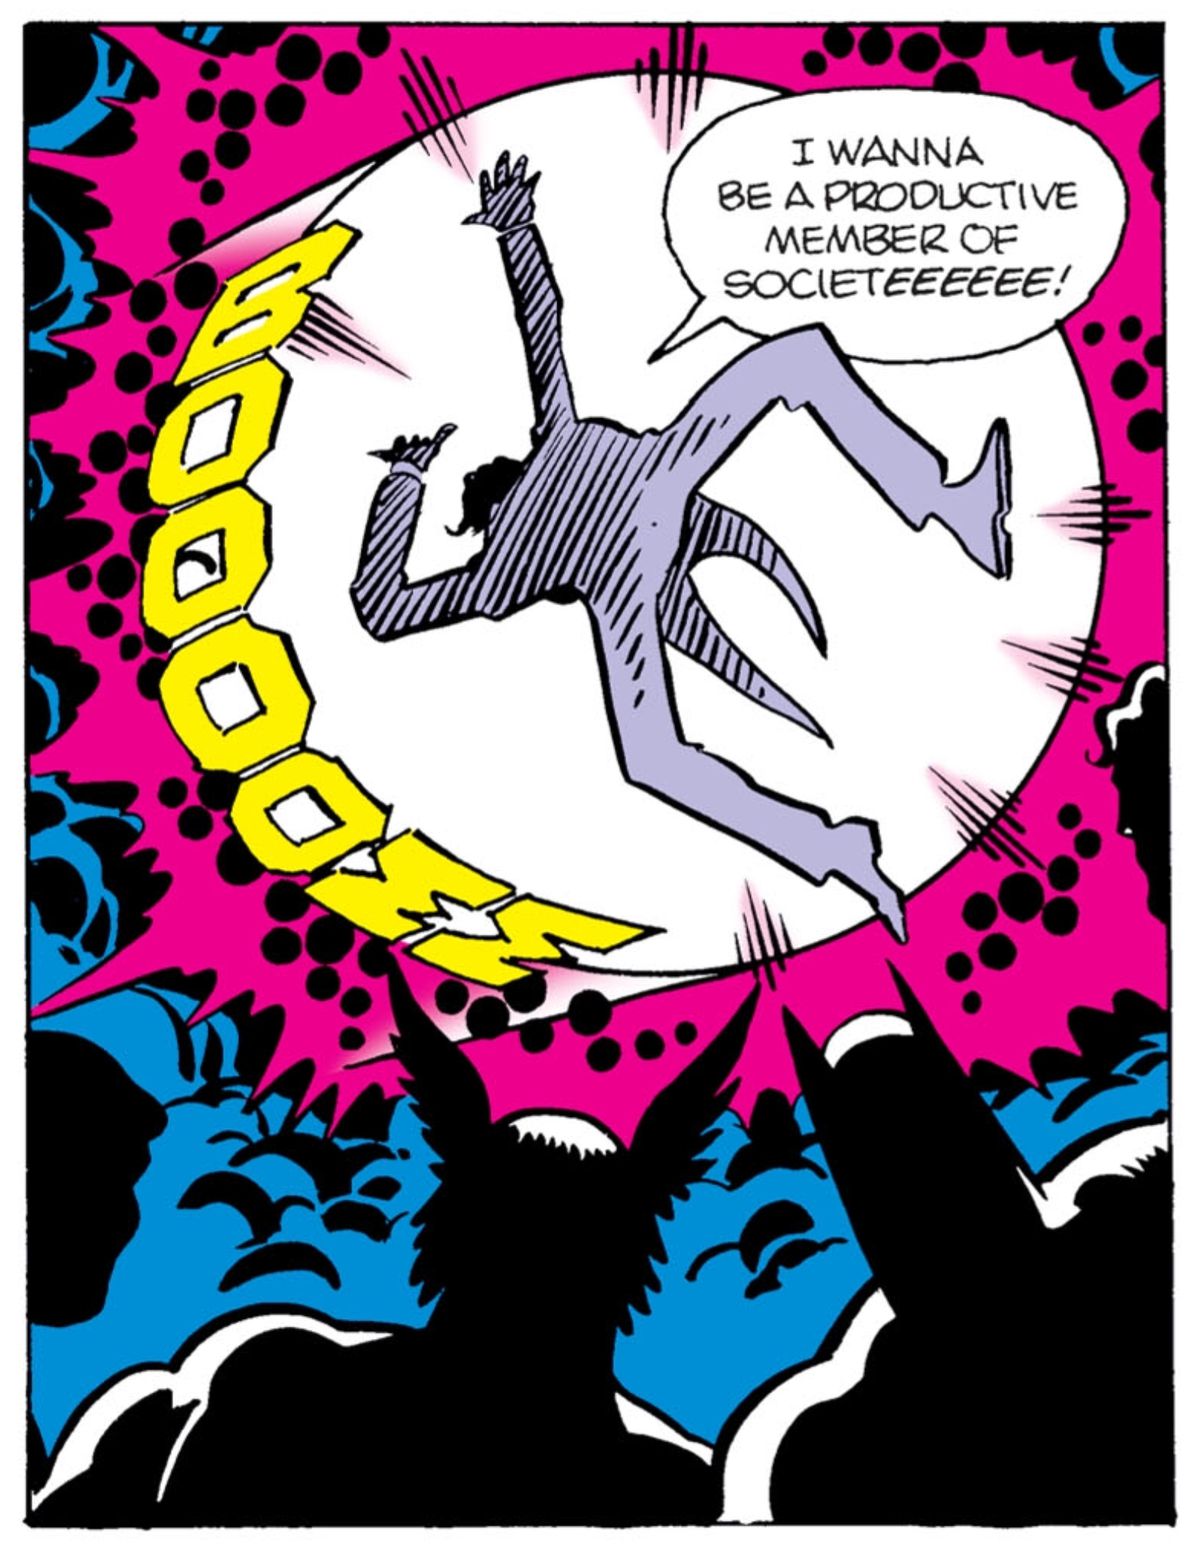 The Joker leaps into the mouth of a Boom Tube, yelling “I wanna be a productive member of societeeeeee!” in Super Powers #2, DC Comics (1984). 